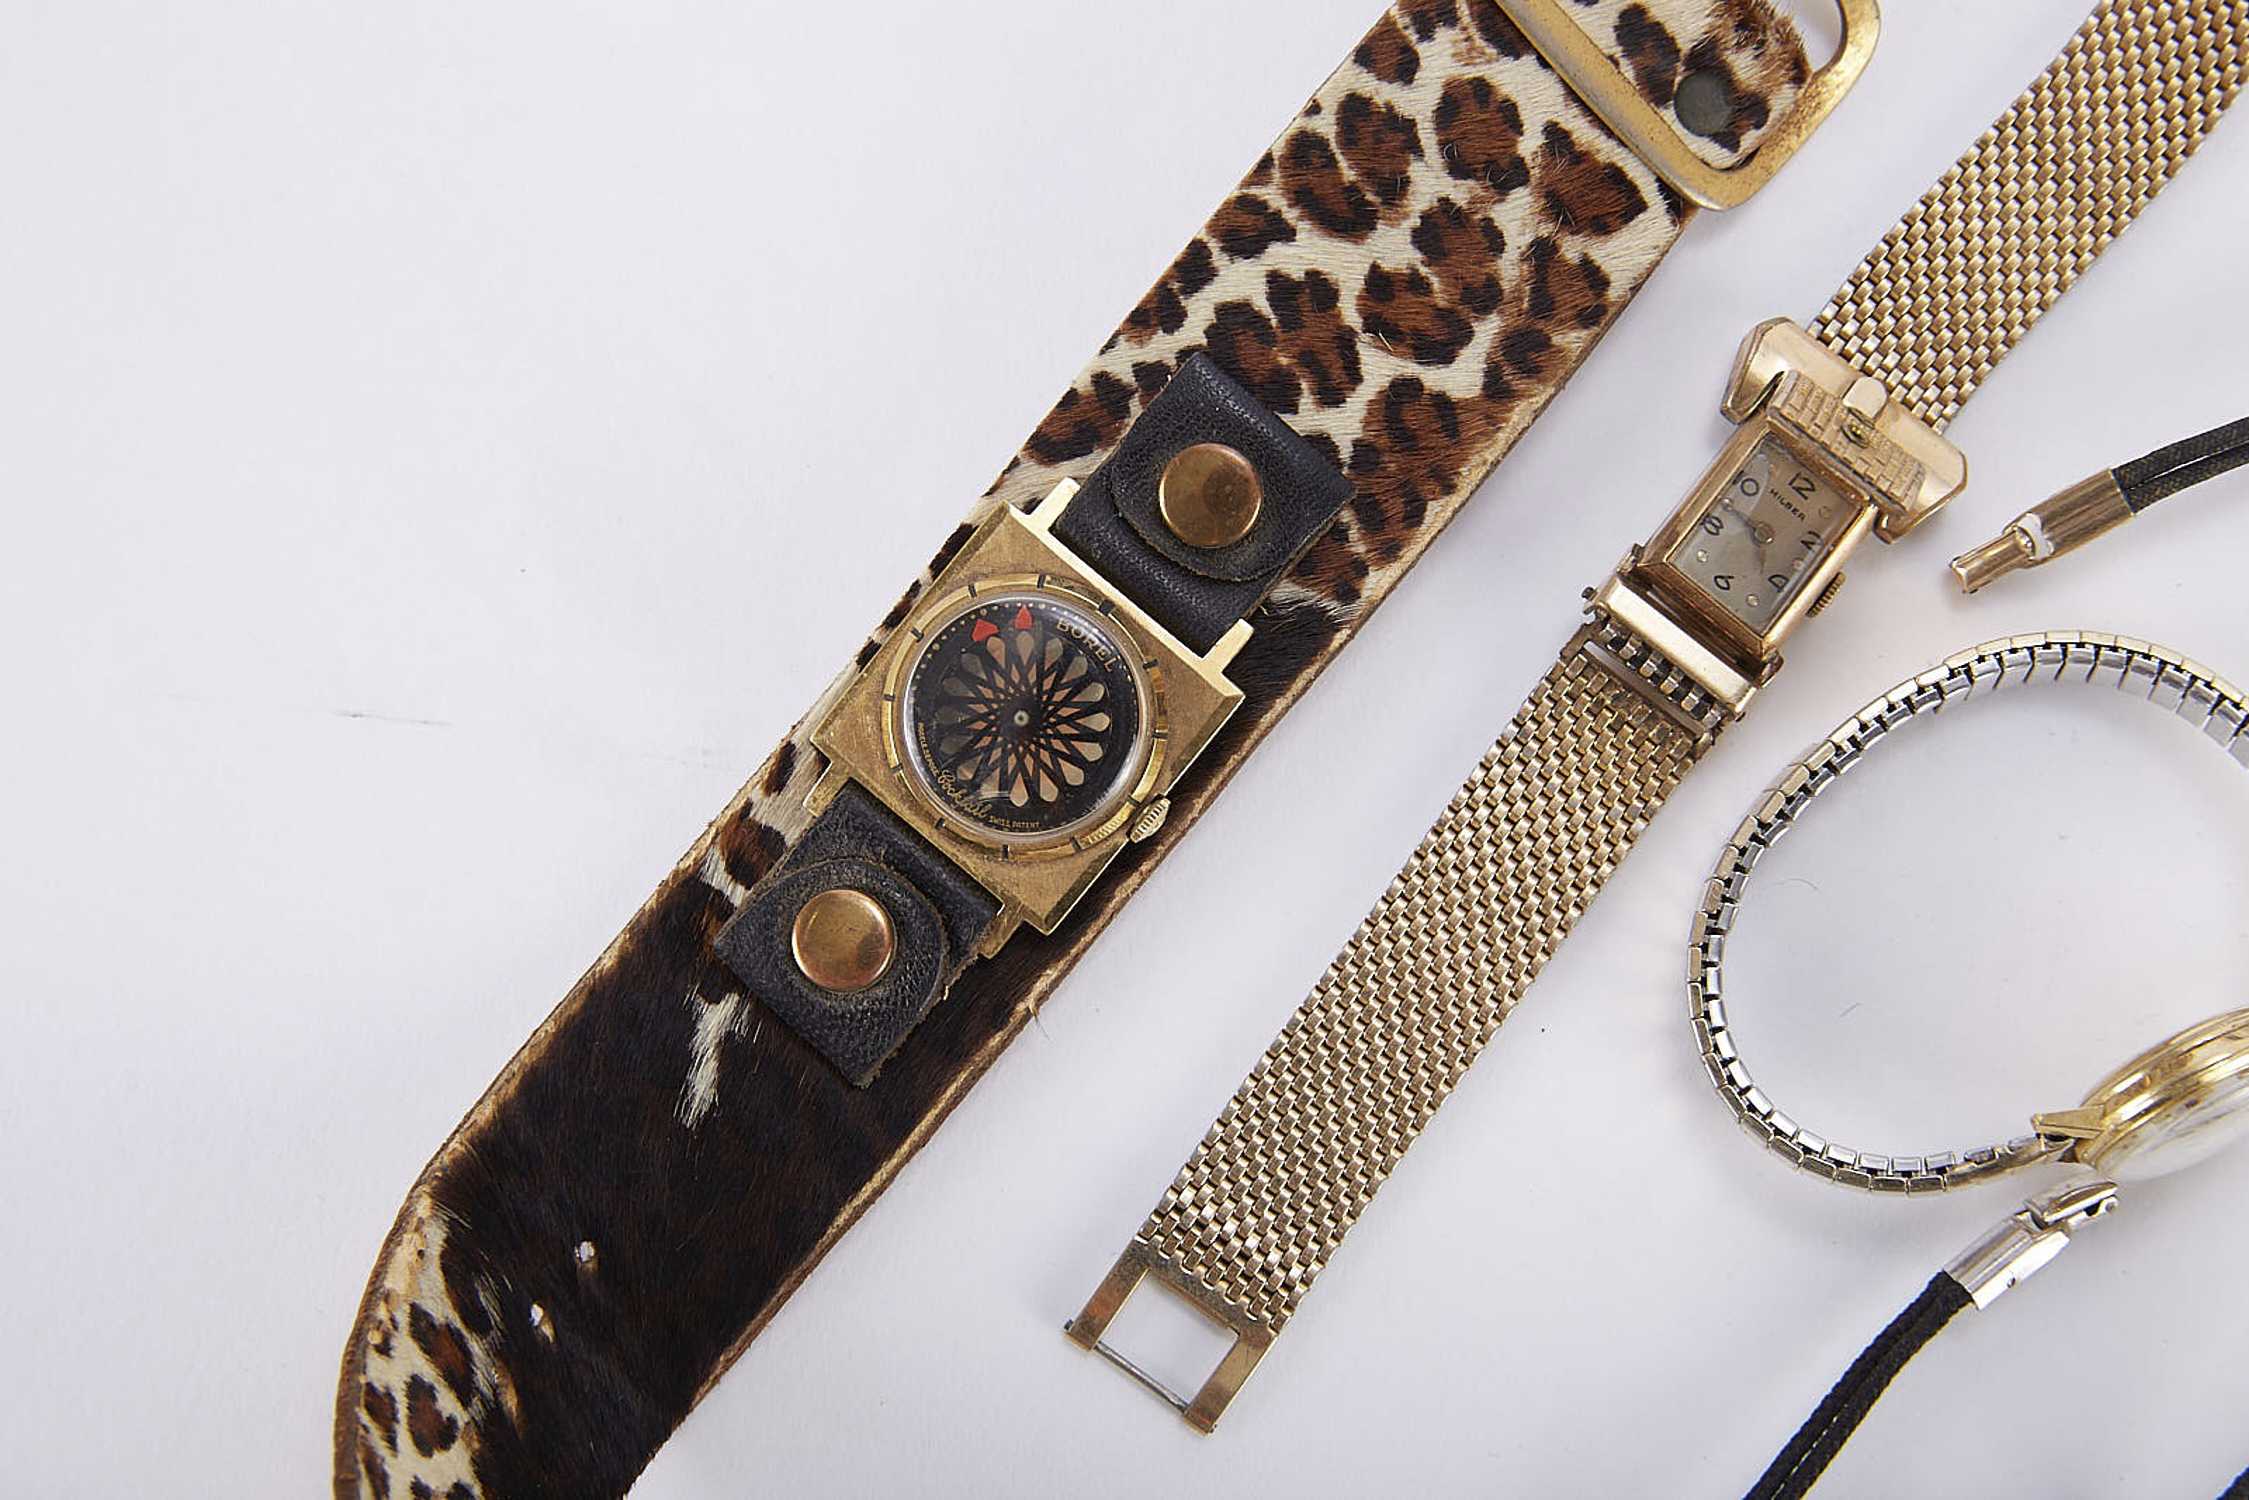 Group of Gold and Gold-filled Watch Cases - Image 6 of 10